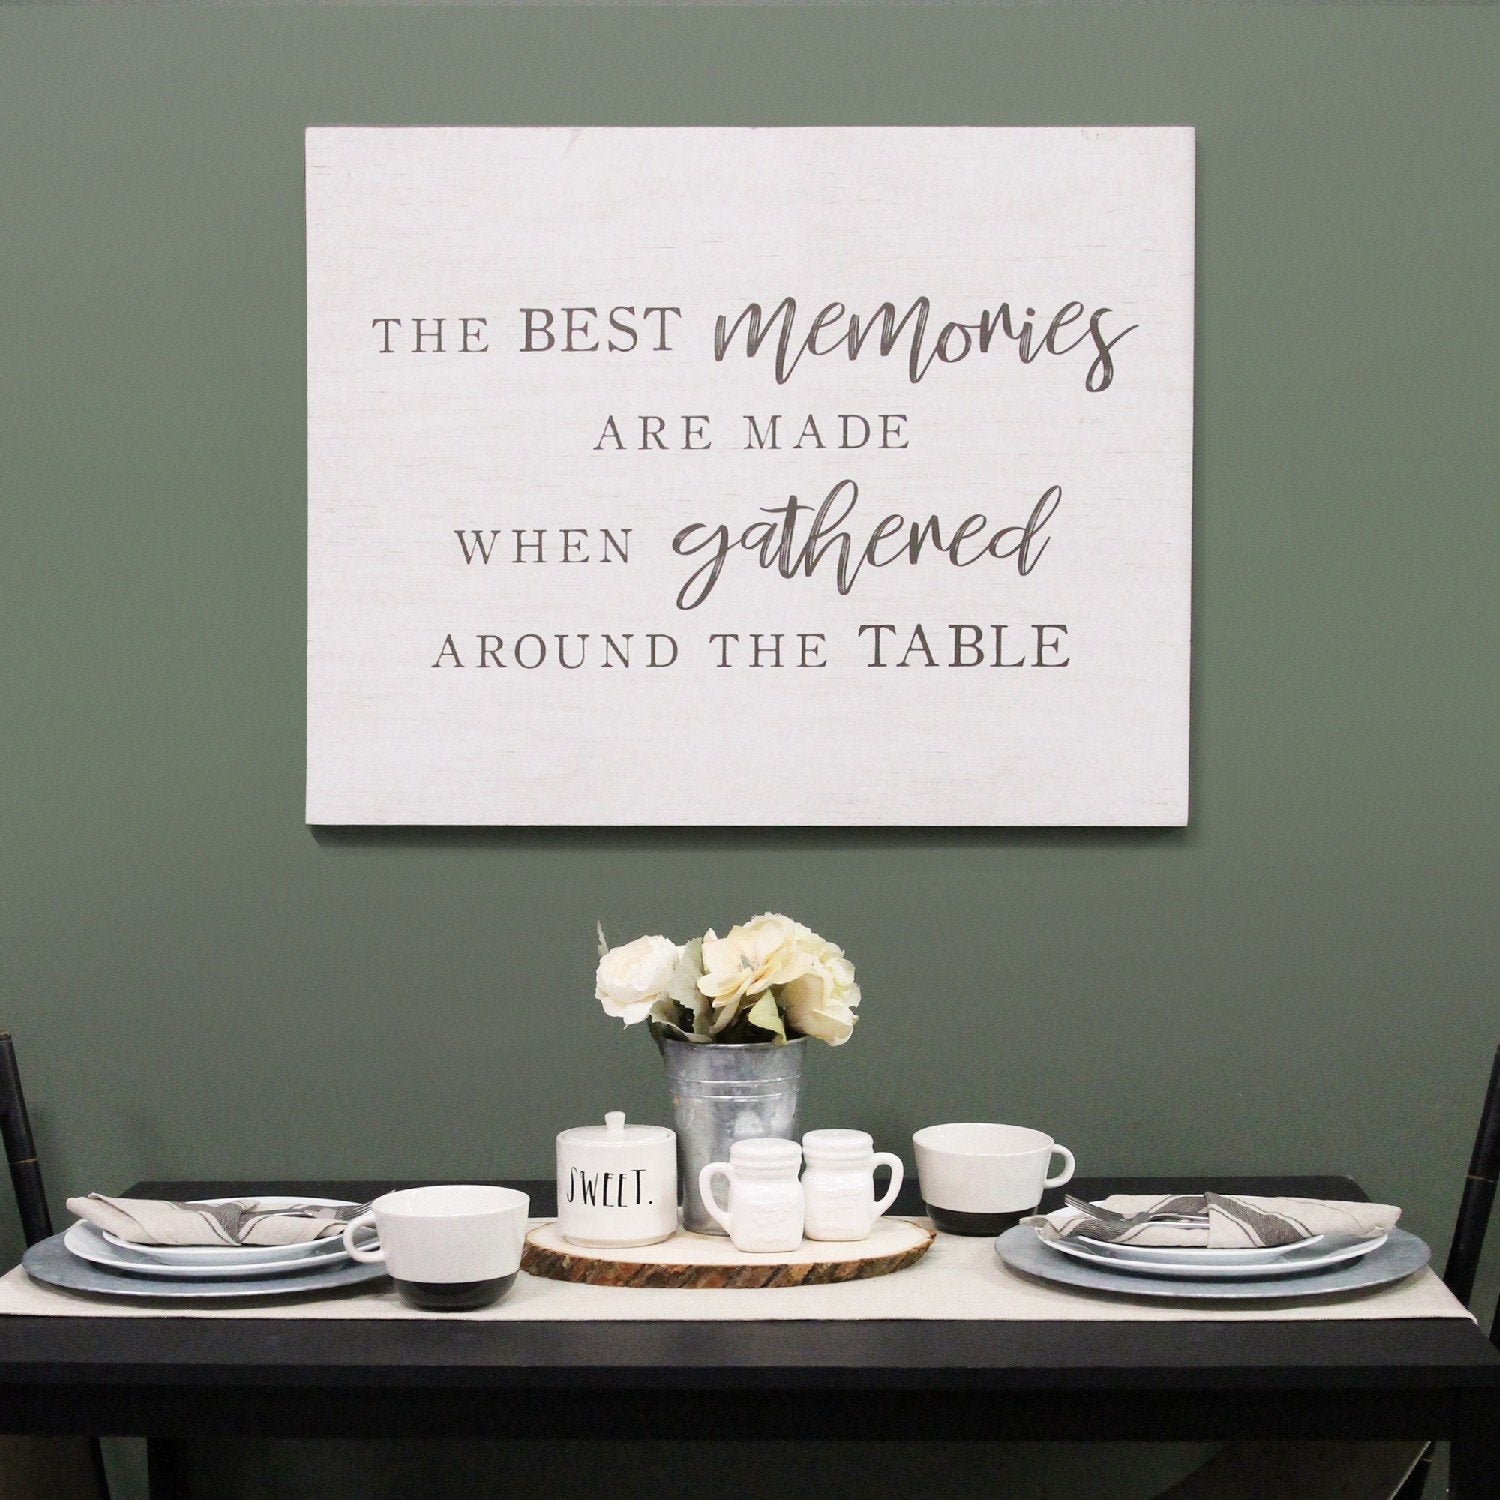 Best Memories Gathered Around The Table Oversized Wall Art